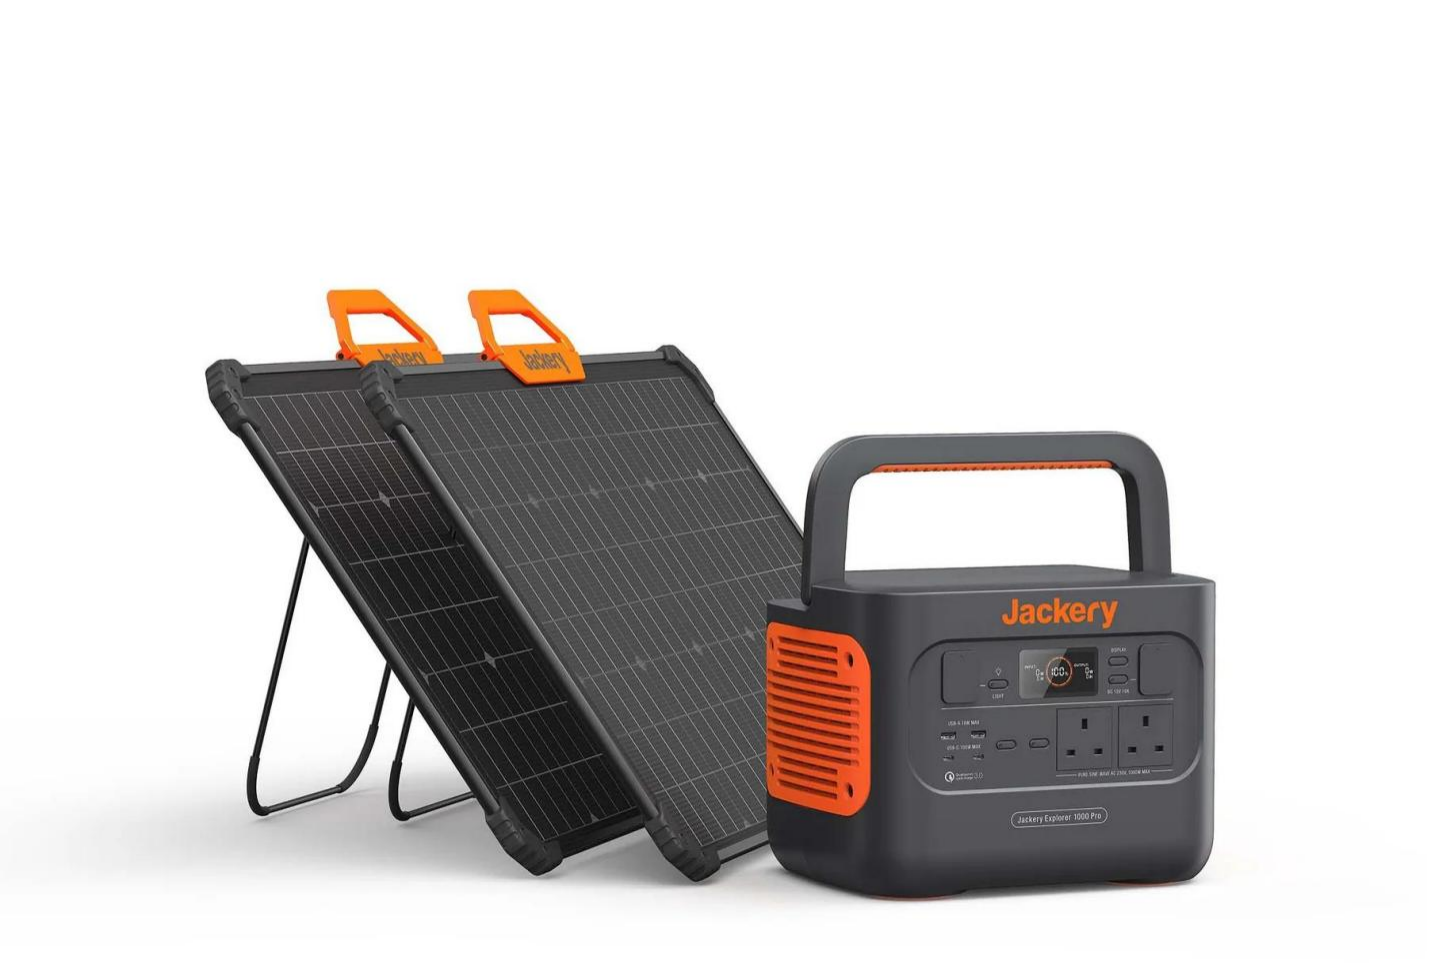 Jackery Solar generator 1000 Pro with an ultra-fast charging system